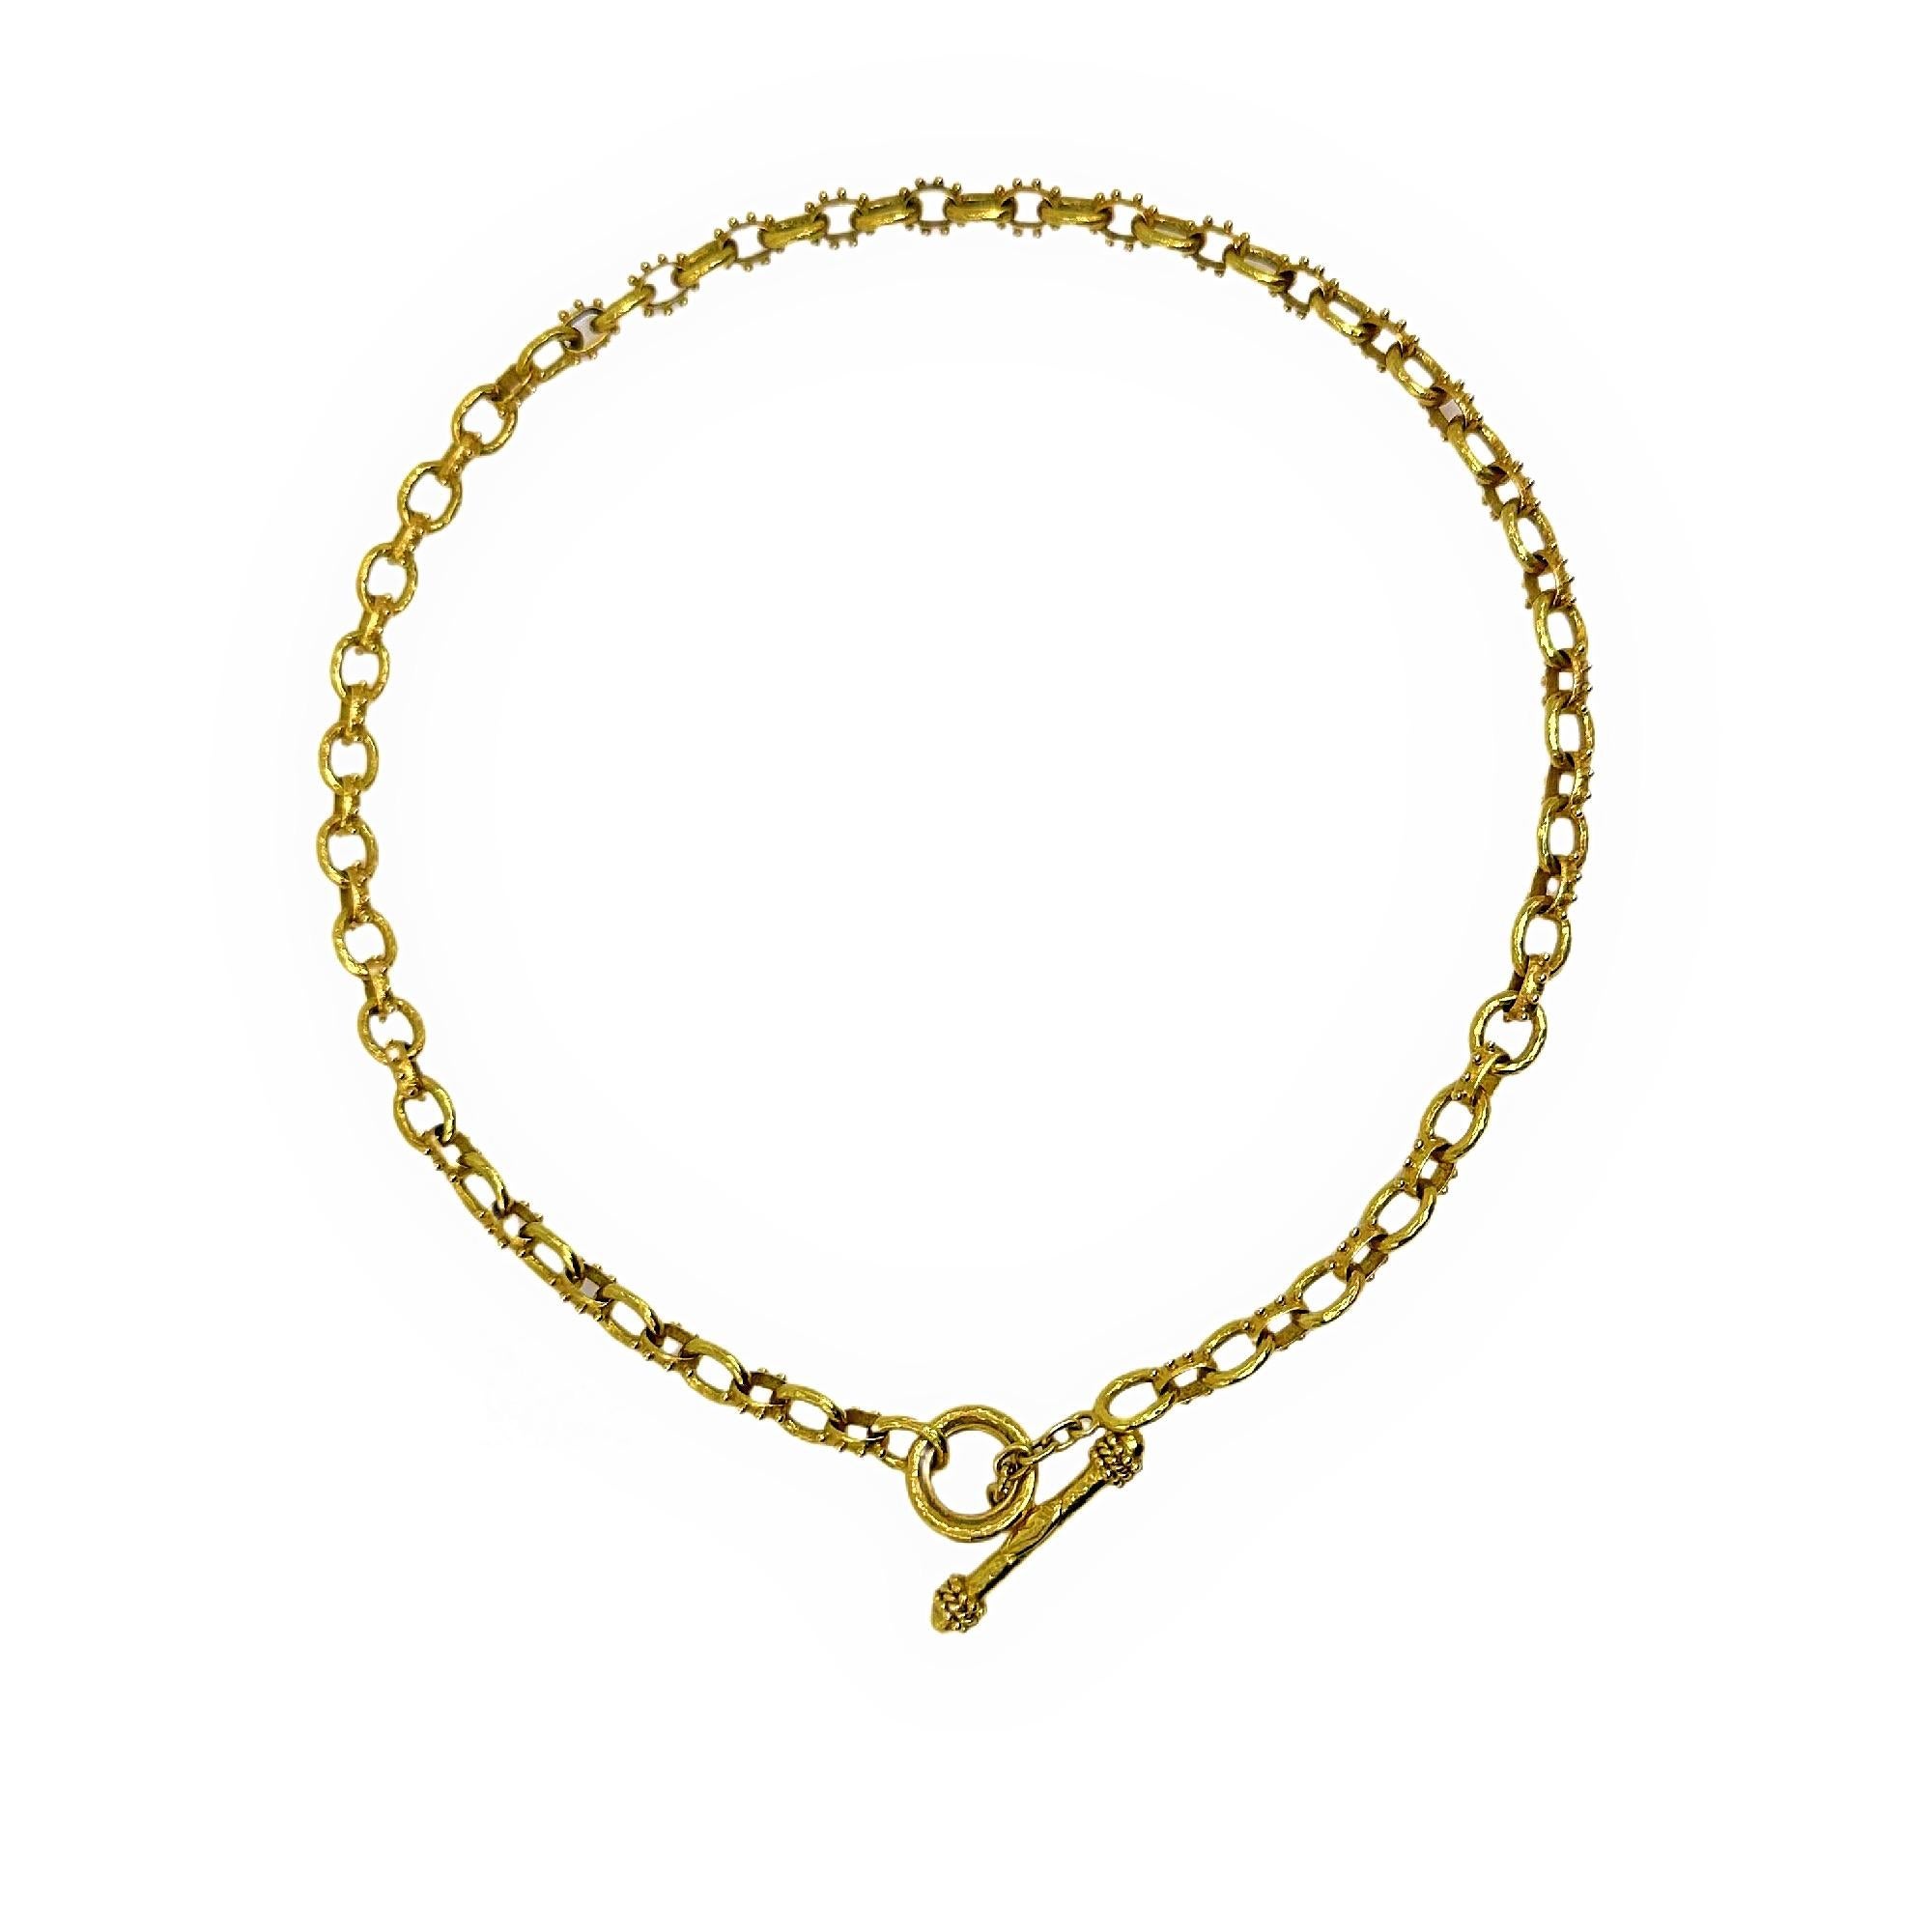 Elizabeth Locke Spiked Oval Link Necklace
Style:  Chain
Metal: 19K Yellow Gold
Size:  19' Inches
Weight:  51.2 grams
Hallmark:  EL 19K
Includes:  Elegant Necklace Box
Retail:  $10,800

Sku#17500TBJ122422